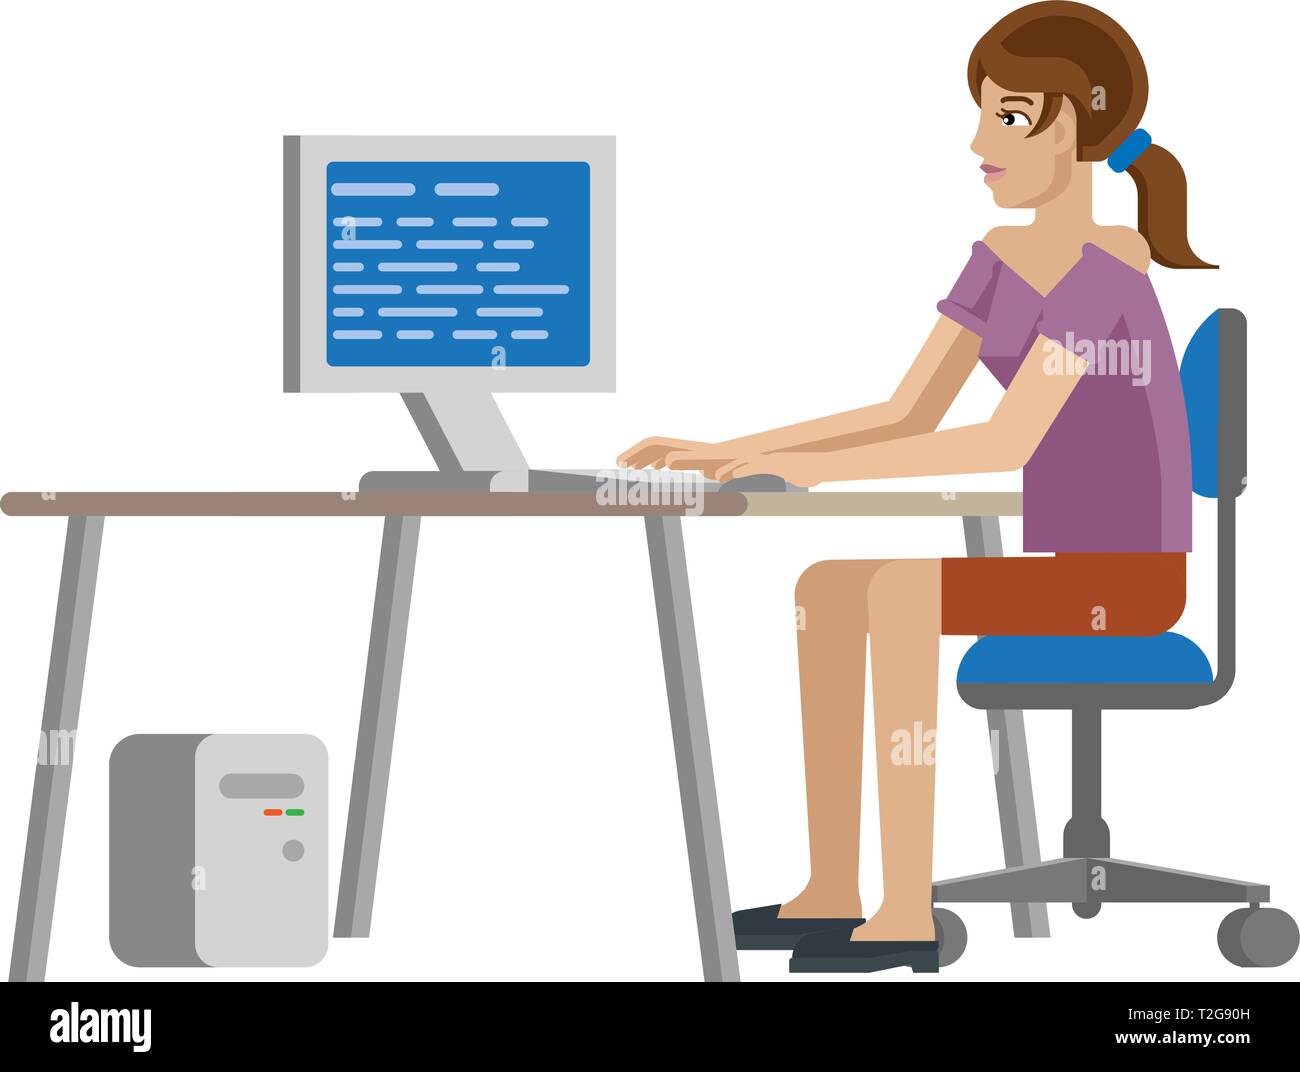 Woman Working at Desk In Business Office Cartoon Stock Vector